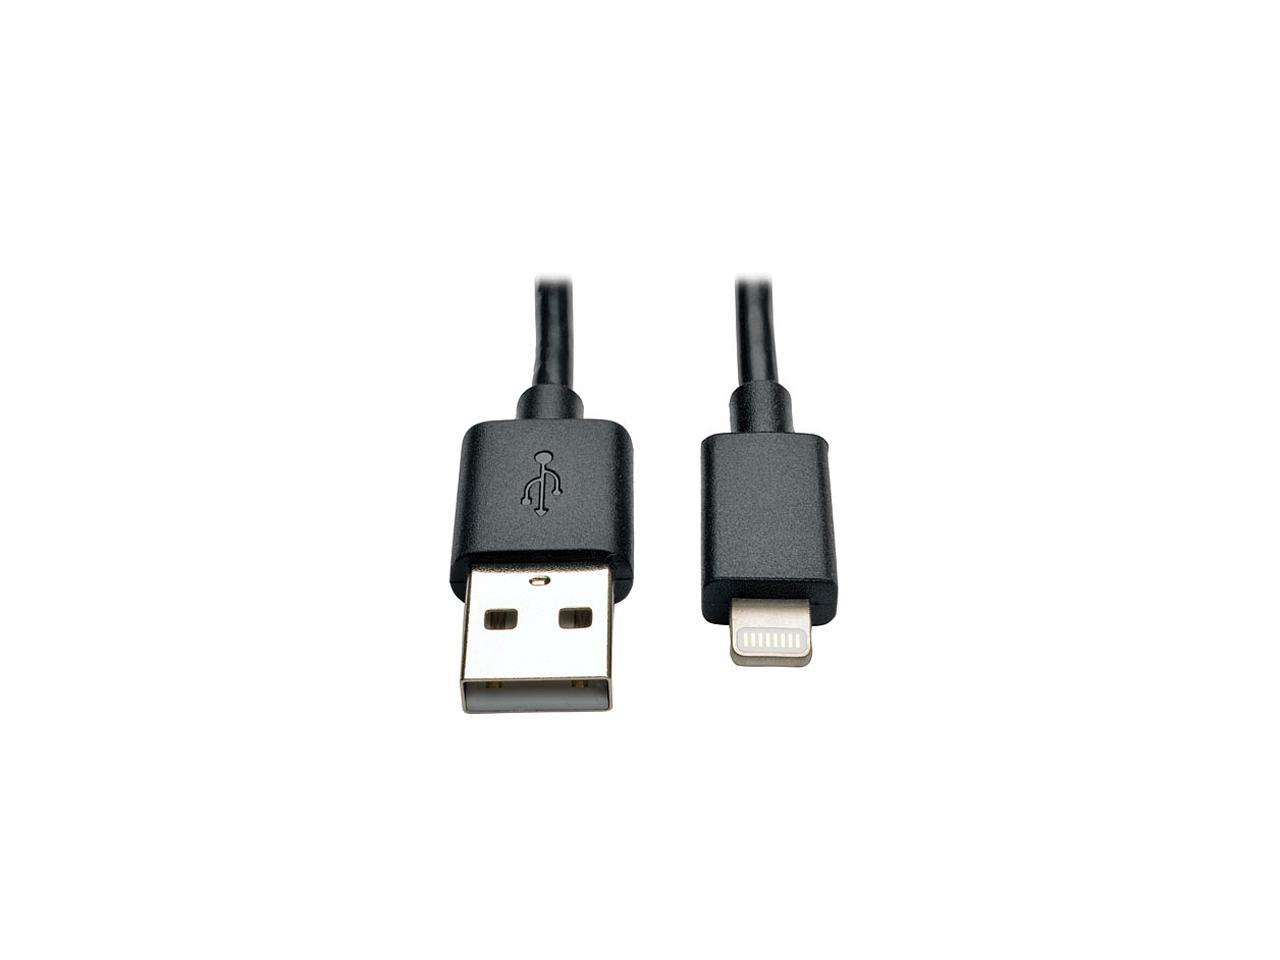 Tripp Lite M100-10N-BK Black MFi Certified Lightning to USB Cable Sync Charge Apple iPhone iPod iPad